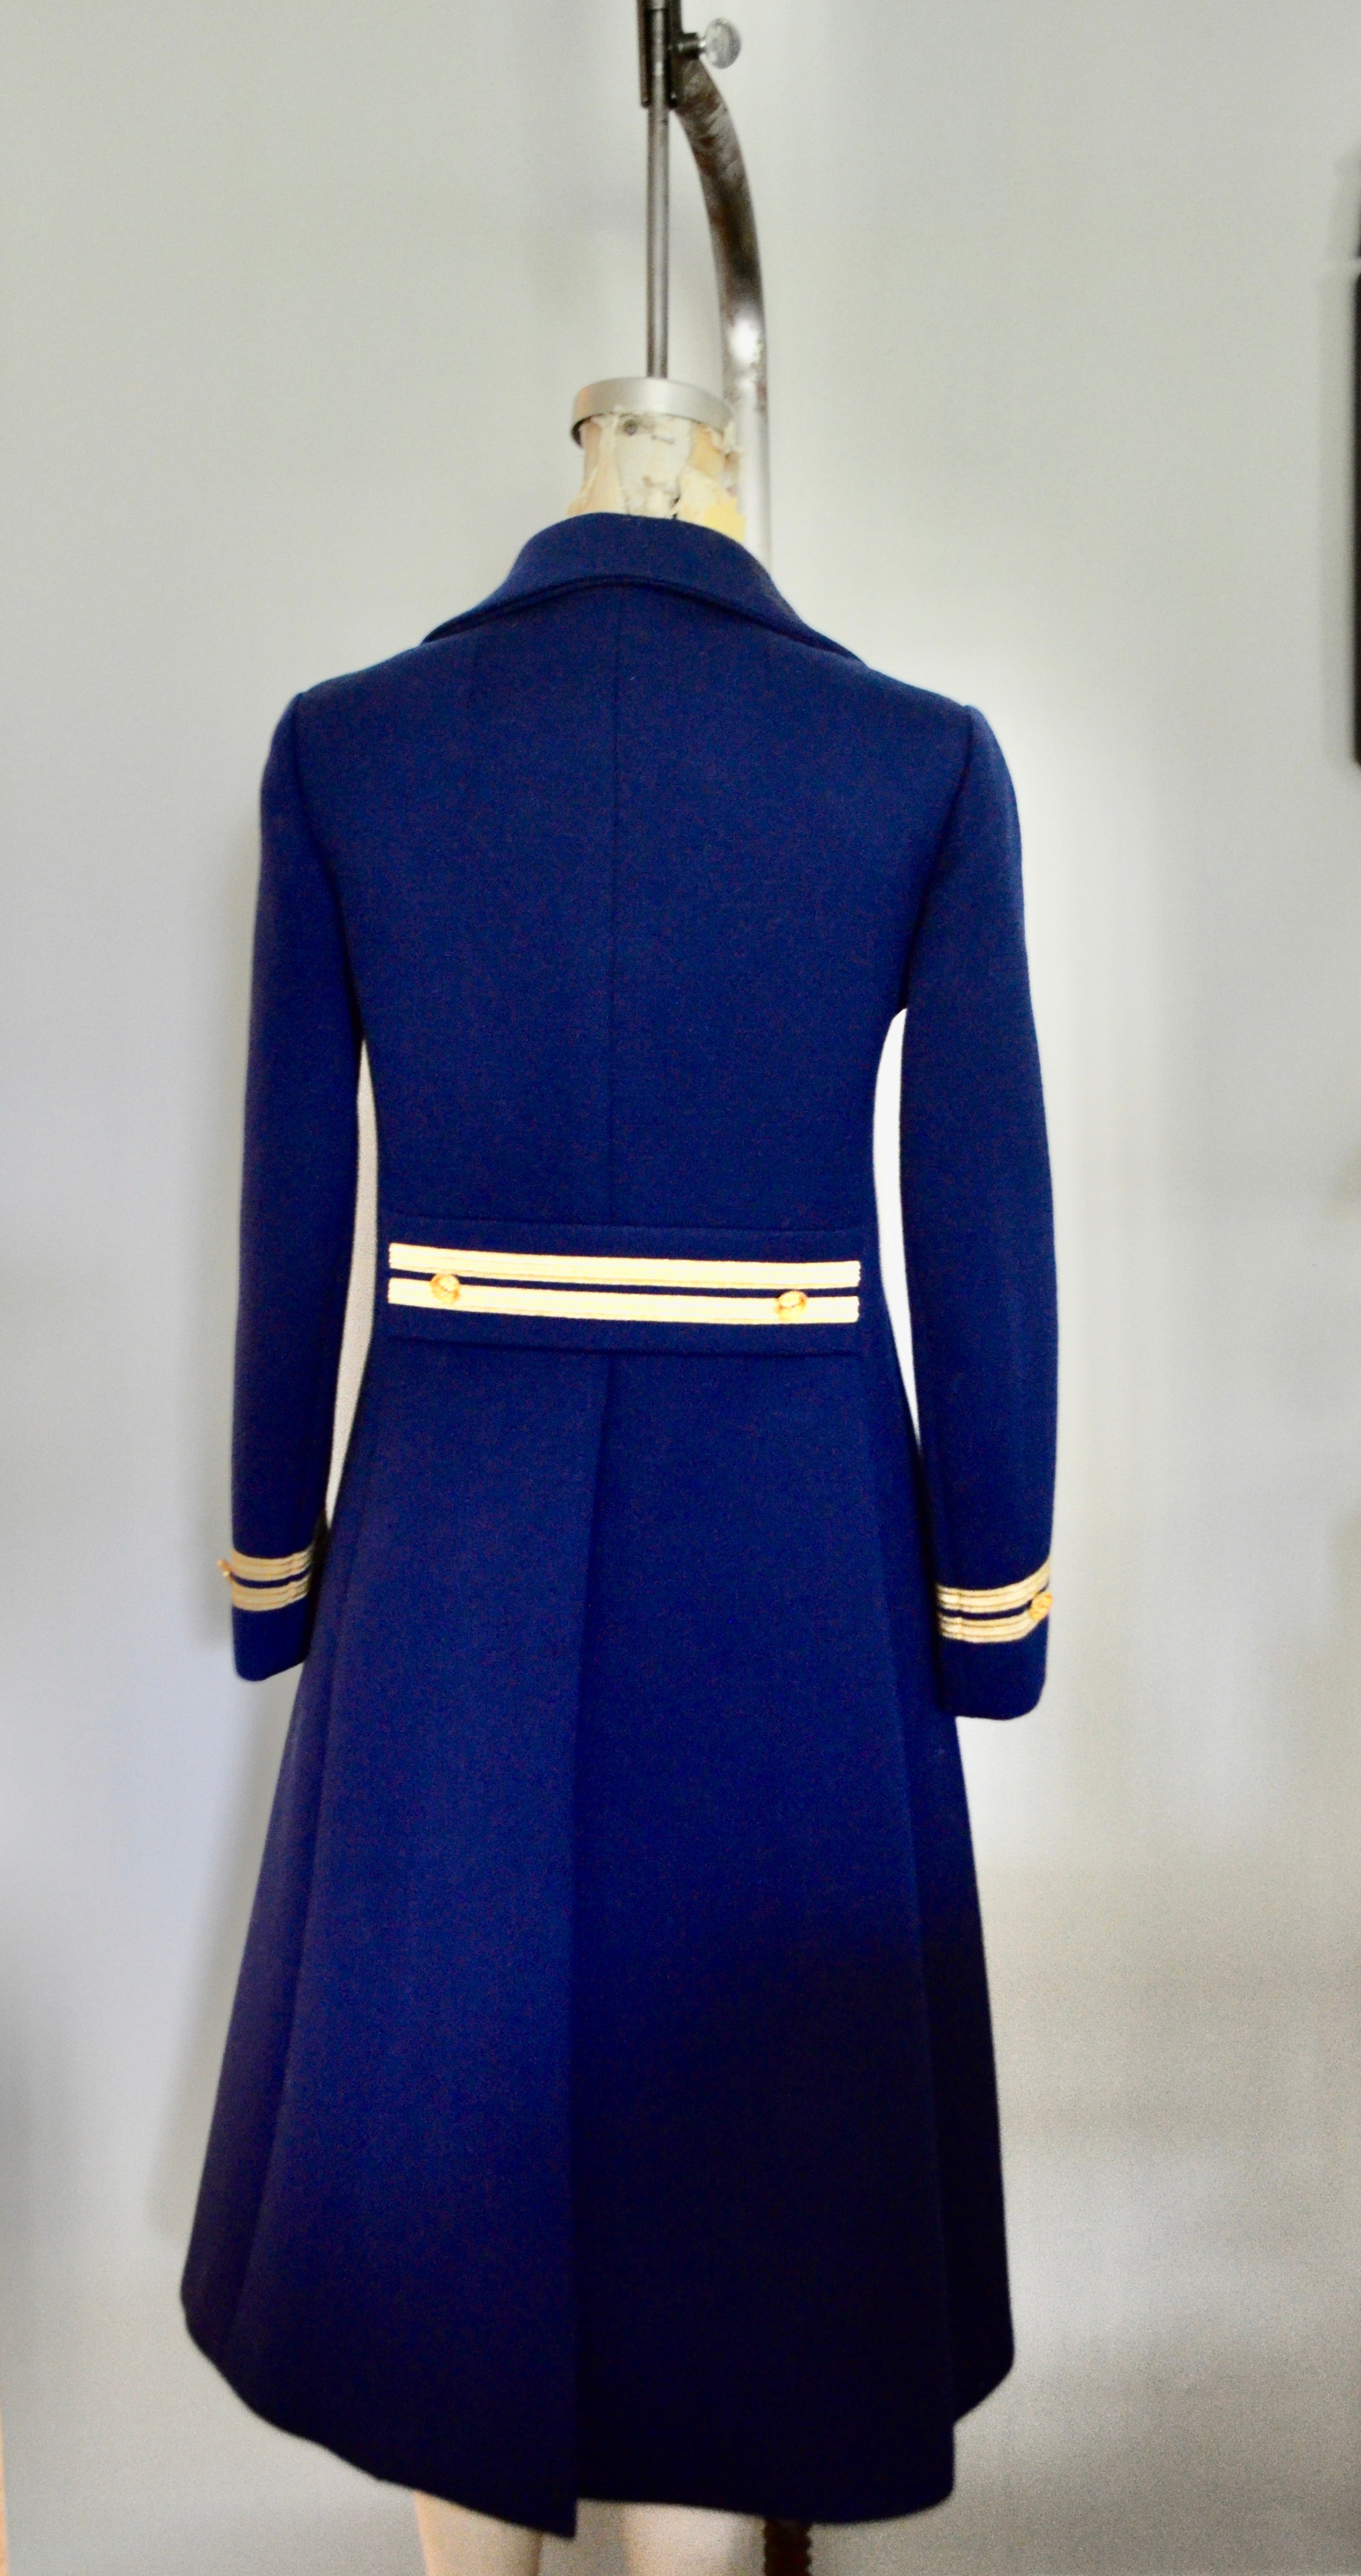 Vintage T Jones military blue navy pea coat with gold trim and crown buttons long jacket